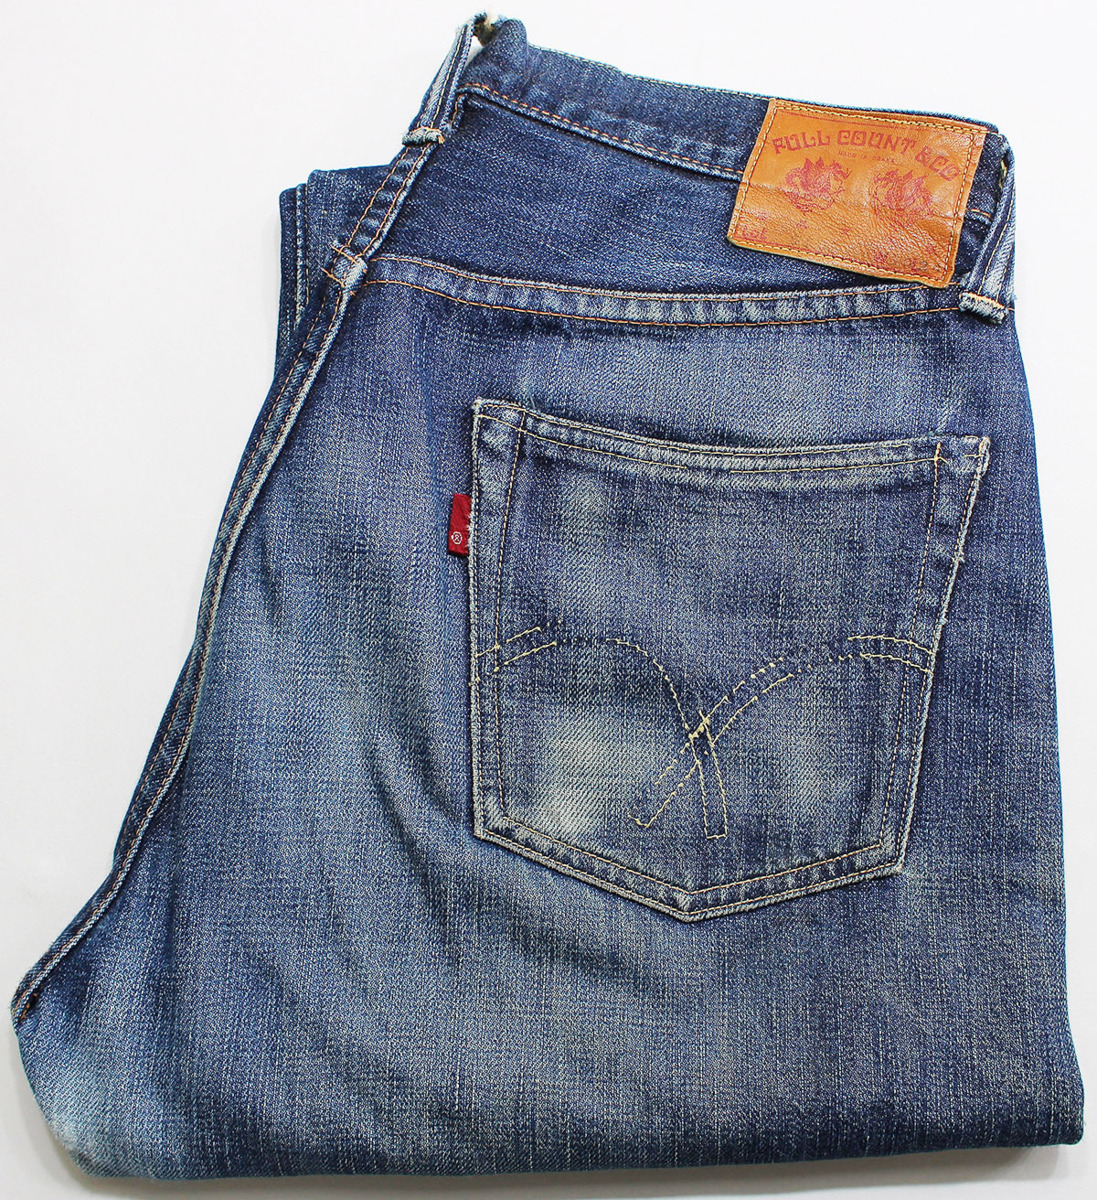 Fullcount ( Fullcount ) Lot 0105 / 1953MODEL 5 pocket jeans w30 /.hige/ reticulum / old specification 